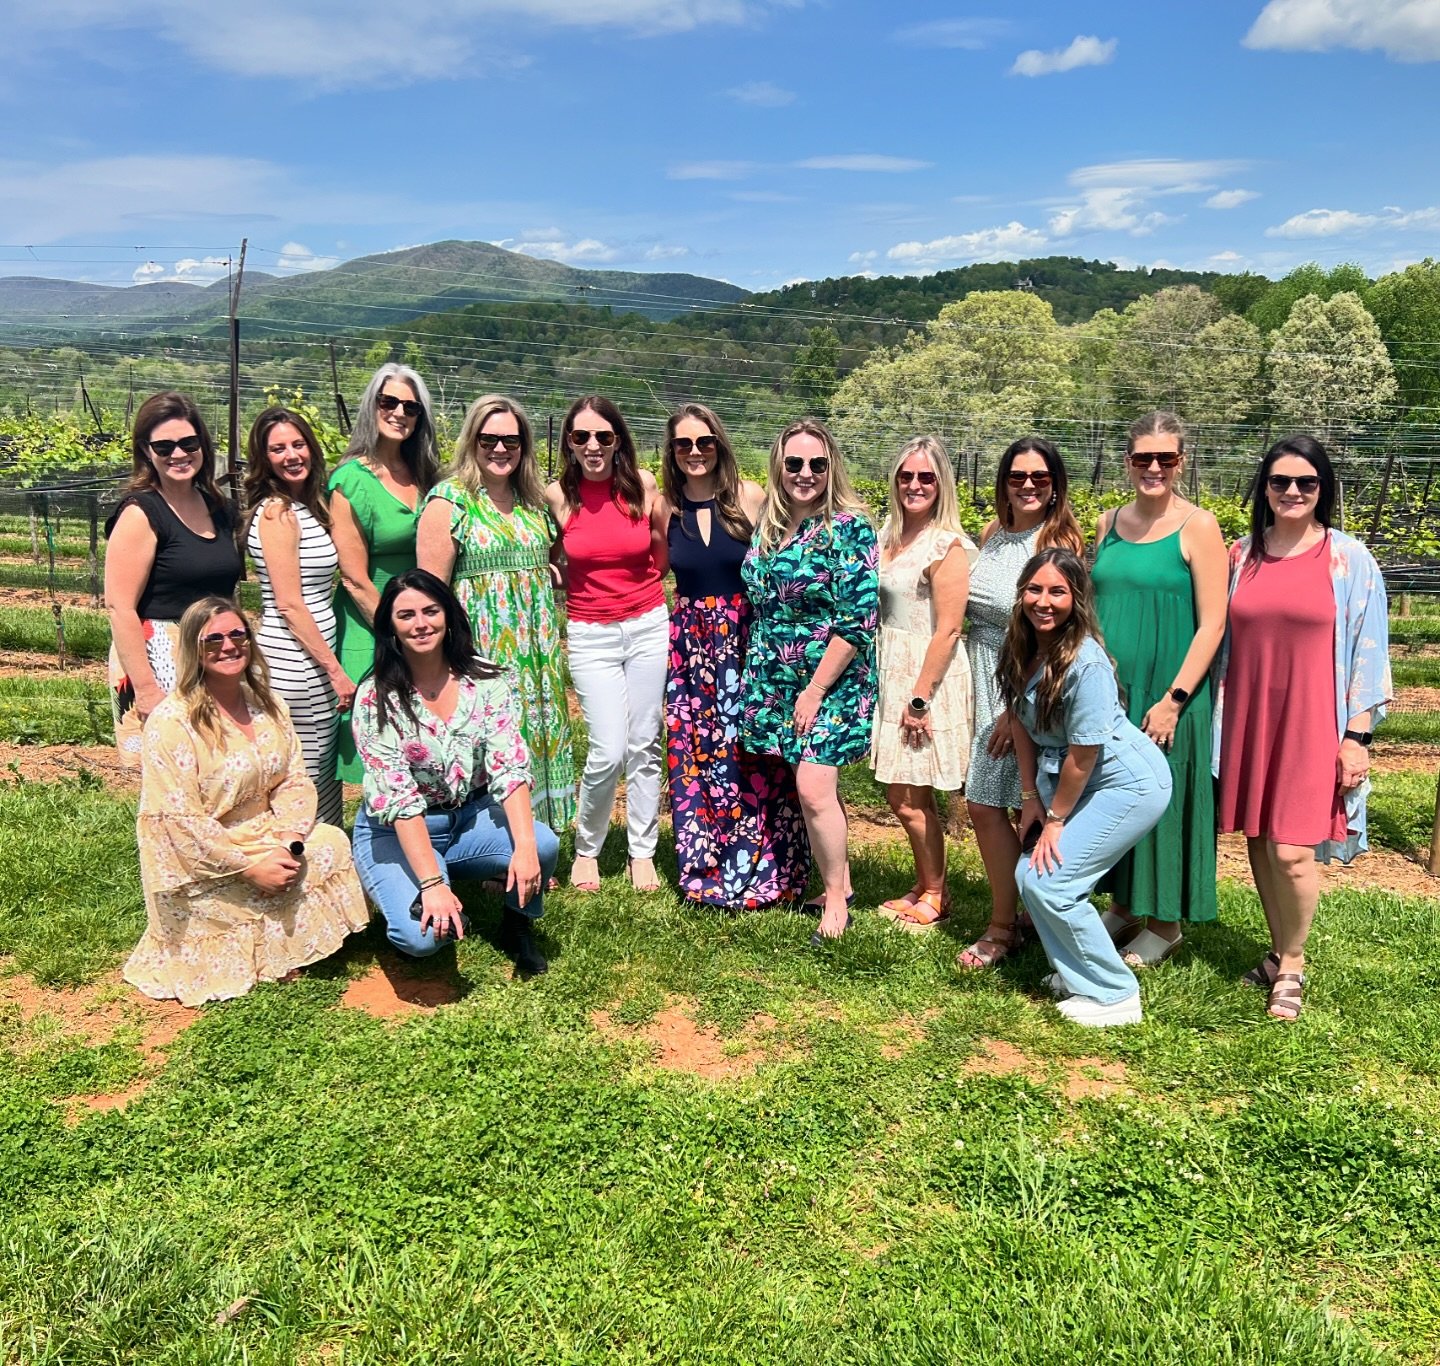 1 of our groups from this past weekend! Pick-up / drop off in Canton. Itinerary: @wolfmountainvineyards @kayavineyards @cottagevineyard 

northgawinetours #discoverdahlonega #northgeorgia #experiencenorthga